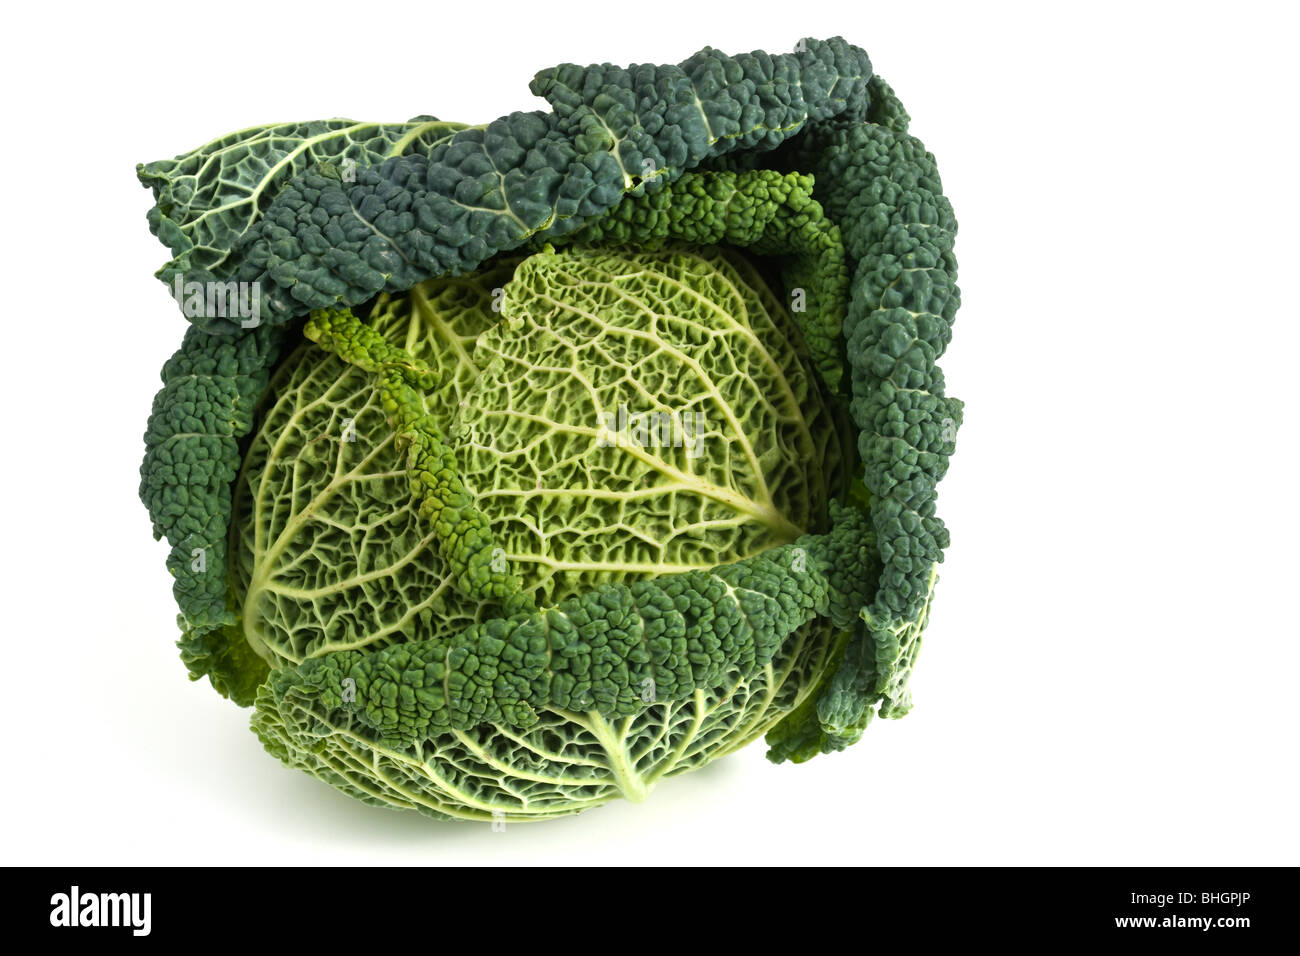 Whole green Savoy cabbage Stock Photo